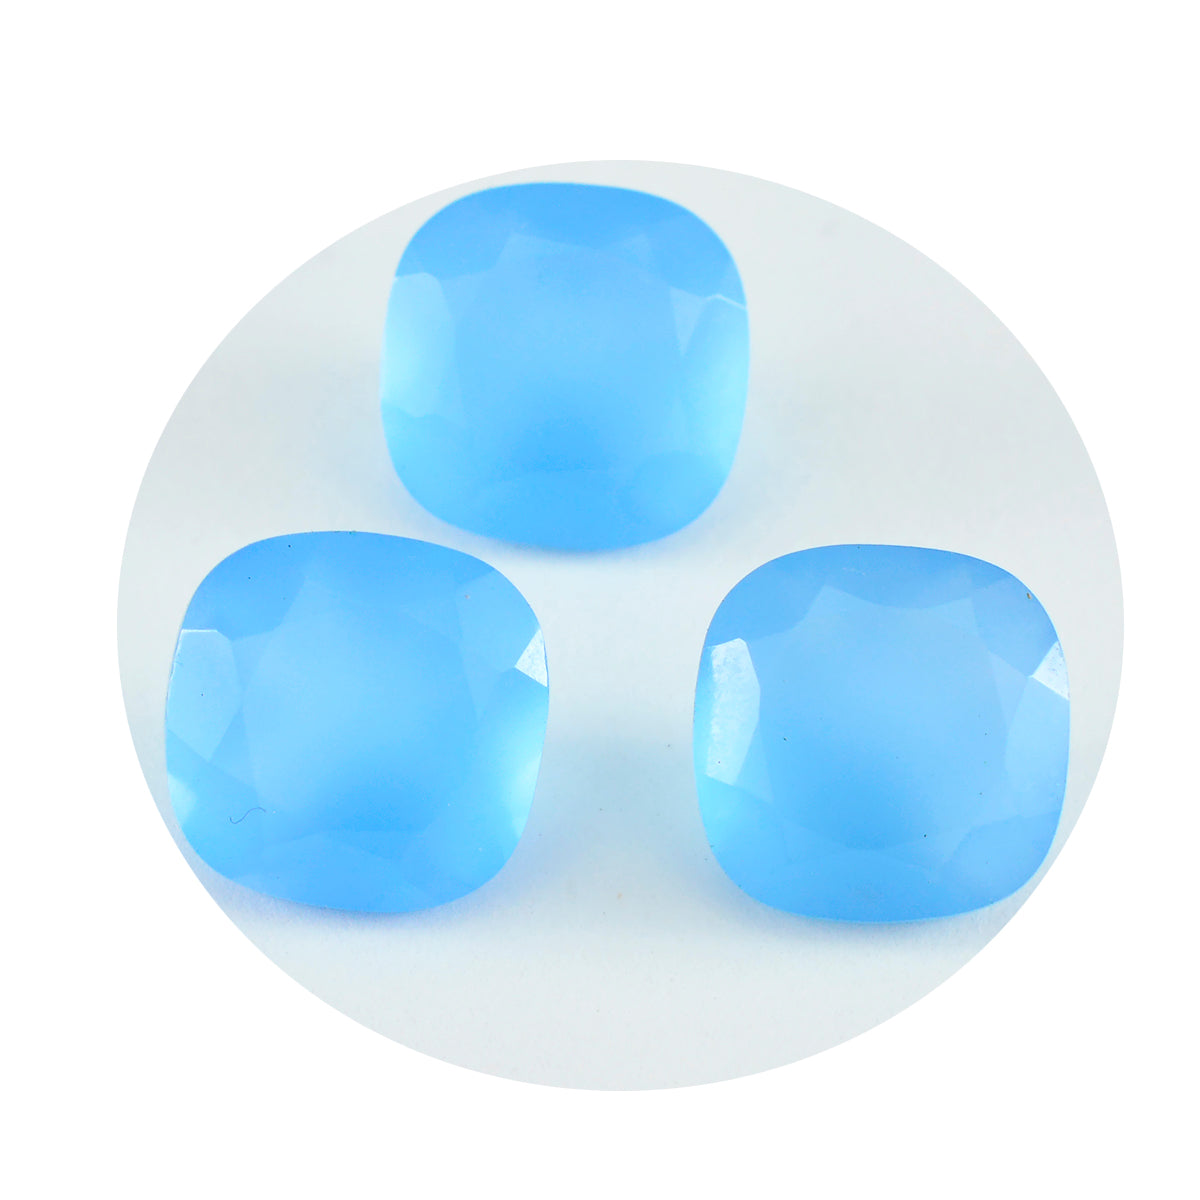 Riyogems 1PC Real Blue Chalcedony Faceted 11x11 mm Cushion Shape nice-looking Quality Gemstone